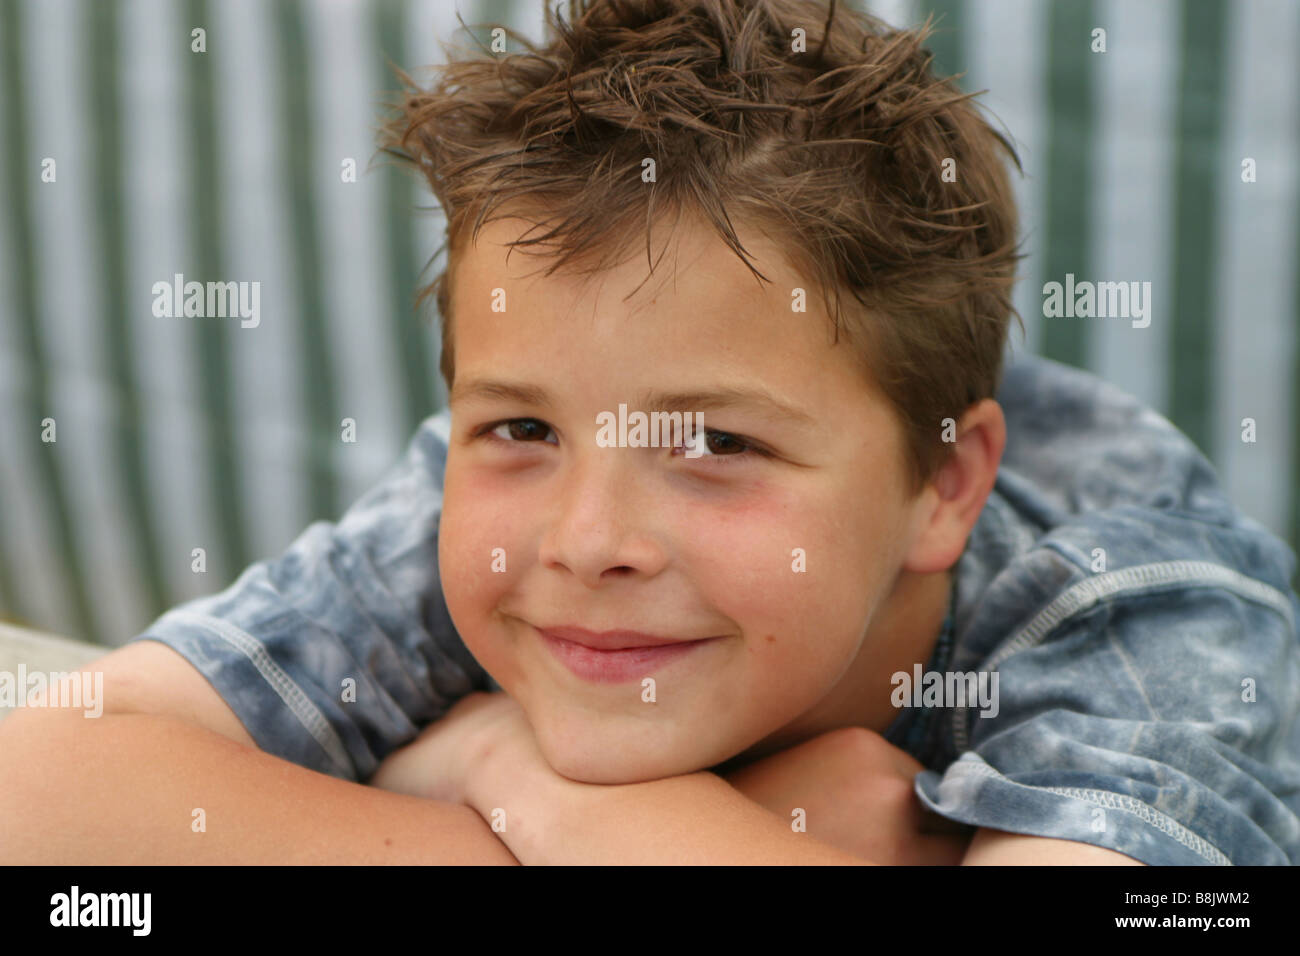 Portrait relaxed young boy, 9 years old,  smiling and look at camera, satisfied preteen. Stock Photo